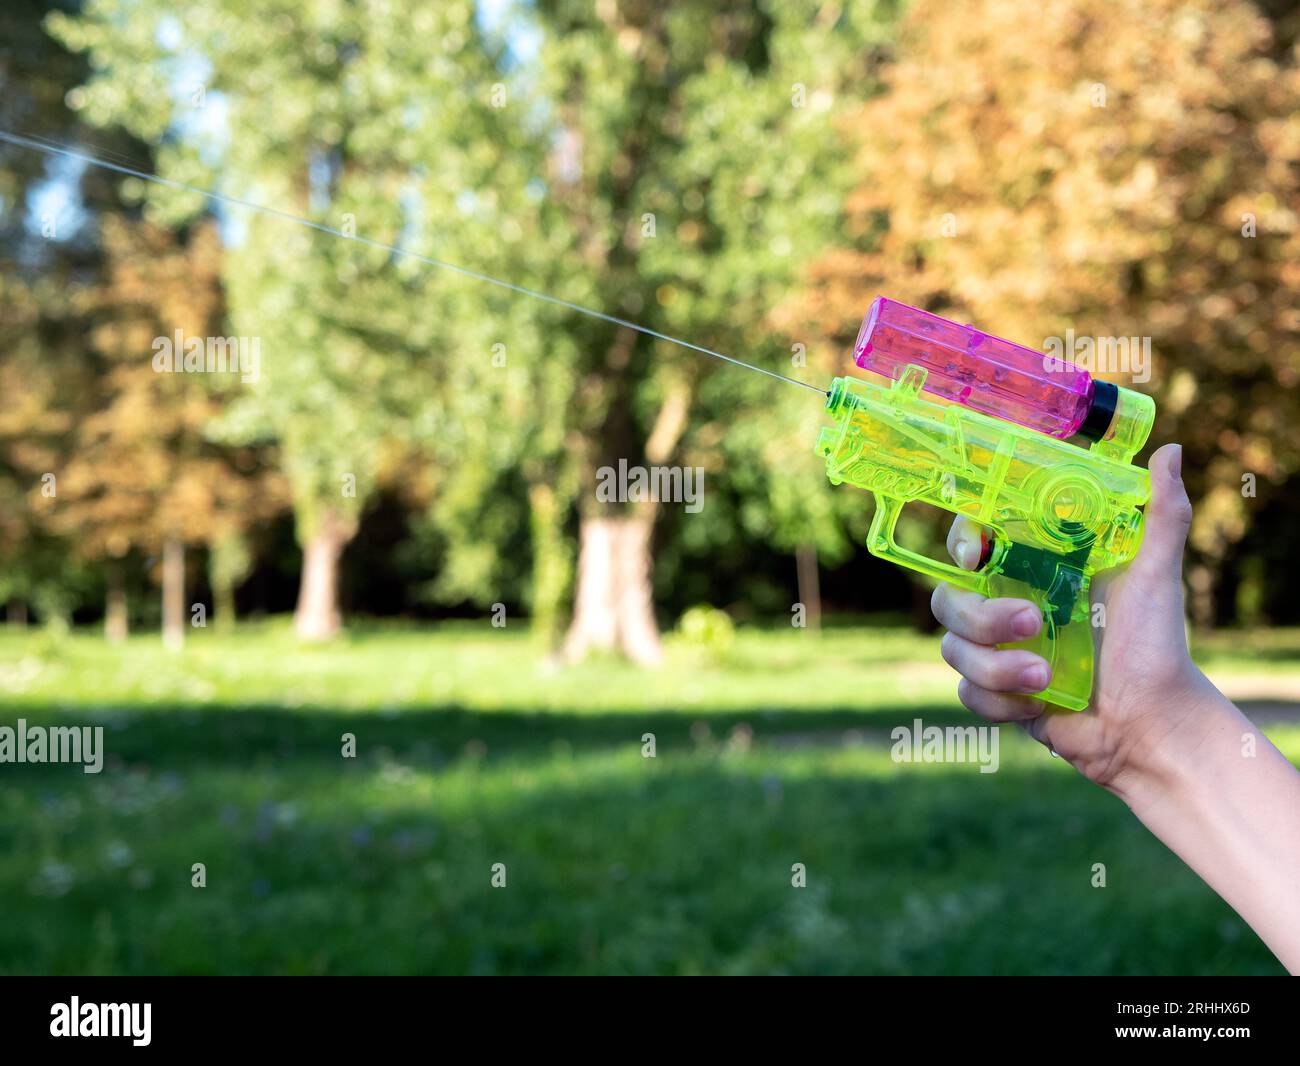 Child is shooting jets of water using a water gun or squirt gun toy, selective focus and copy space. Summertime kids leisure Stock Photo